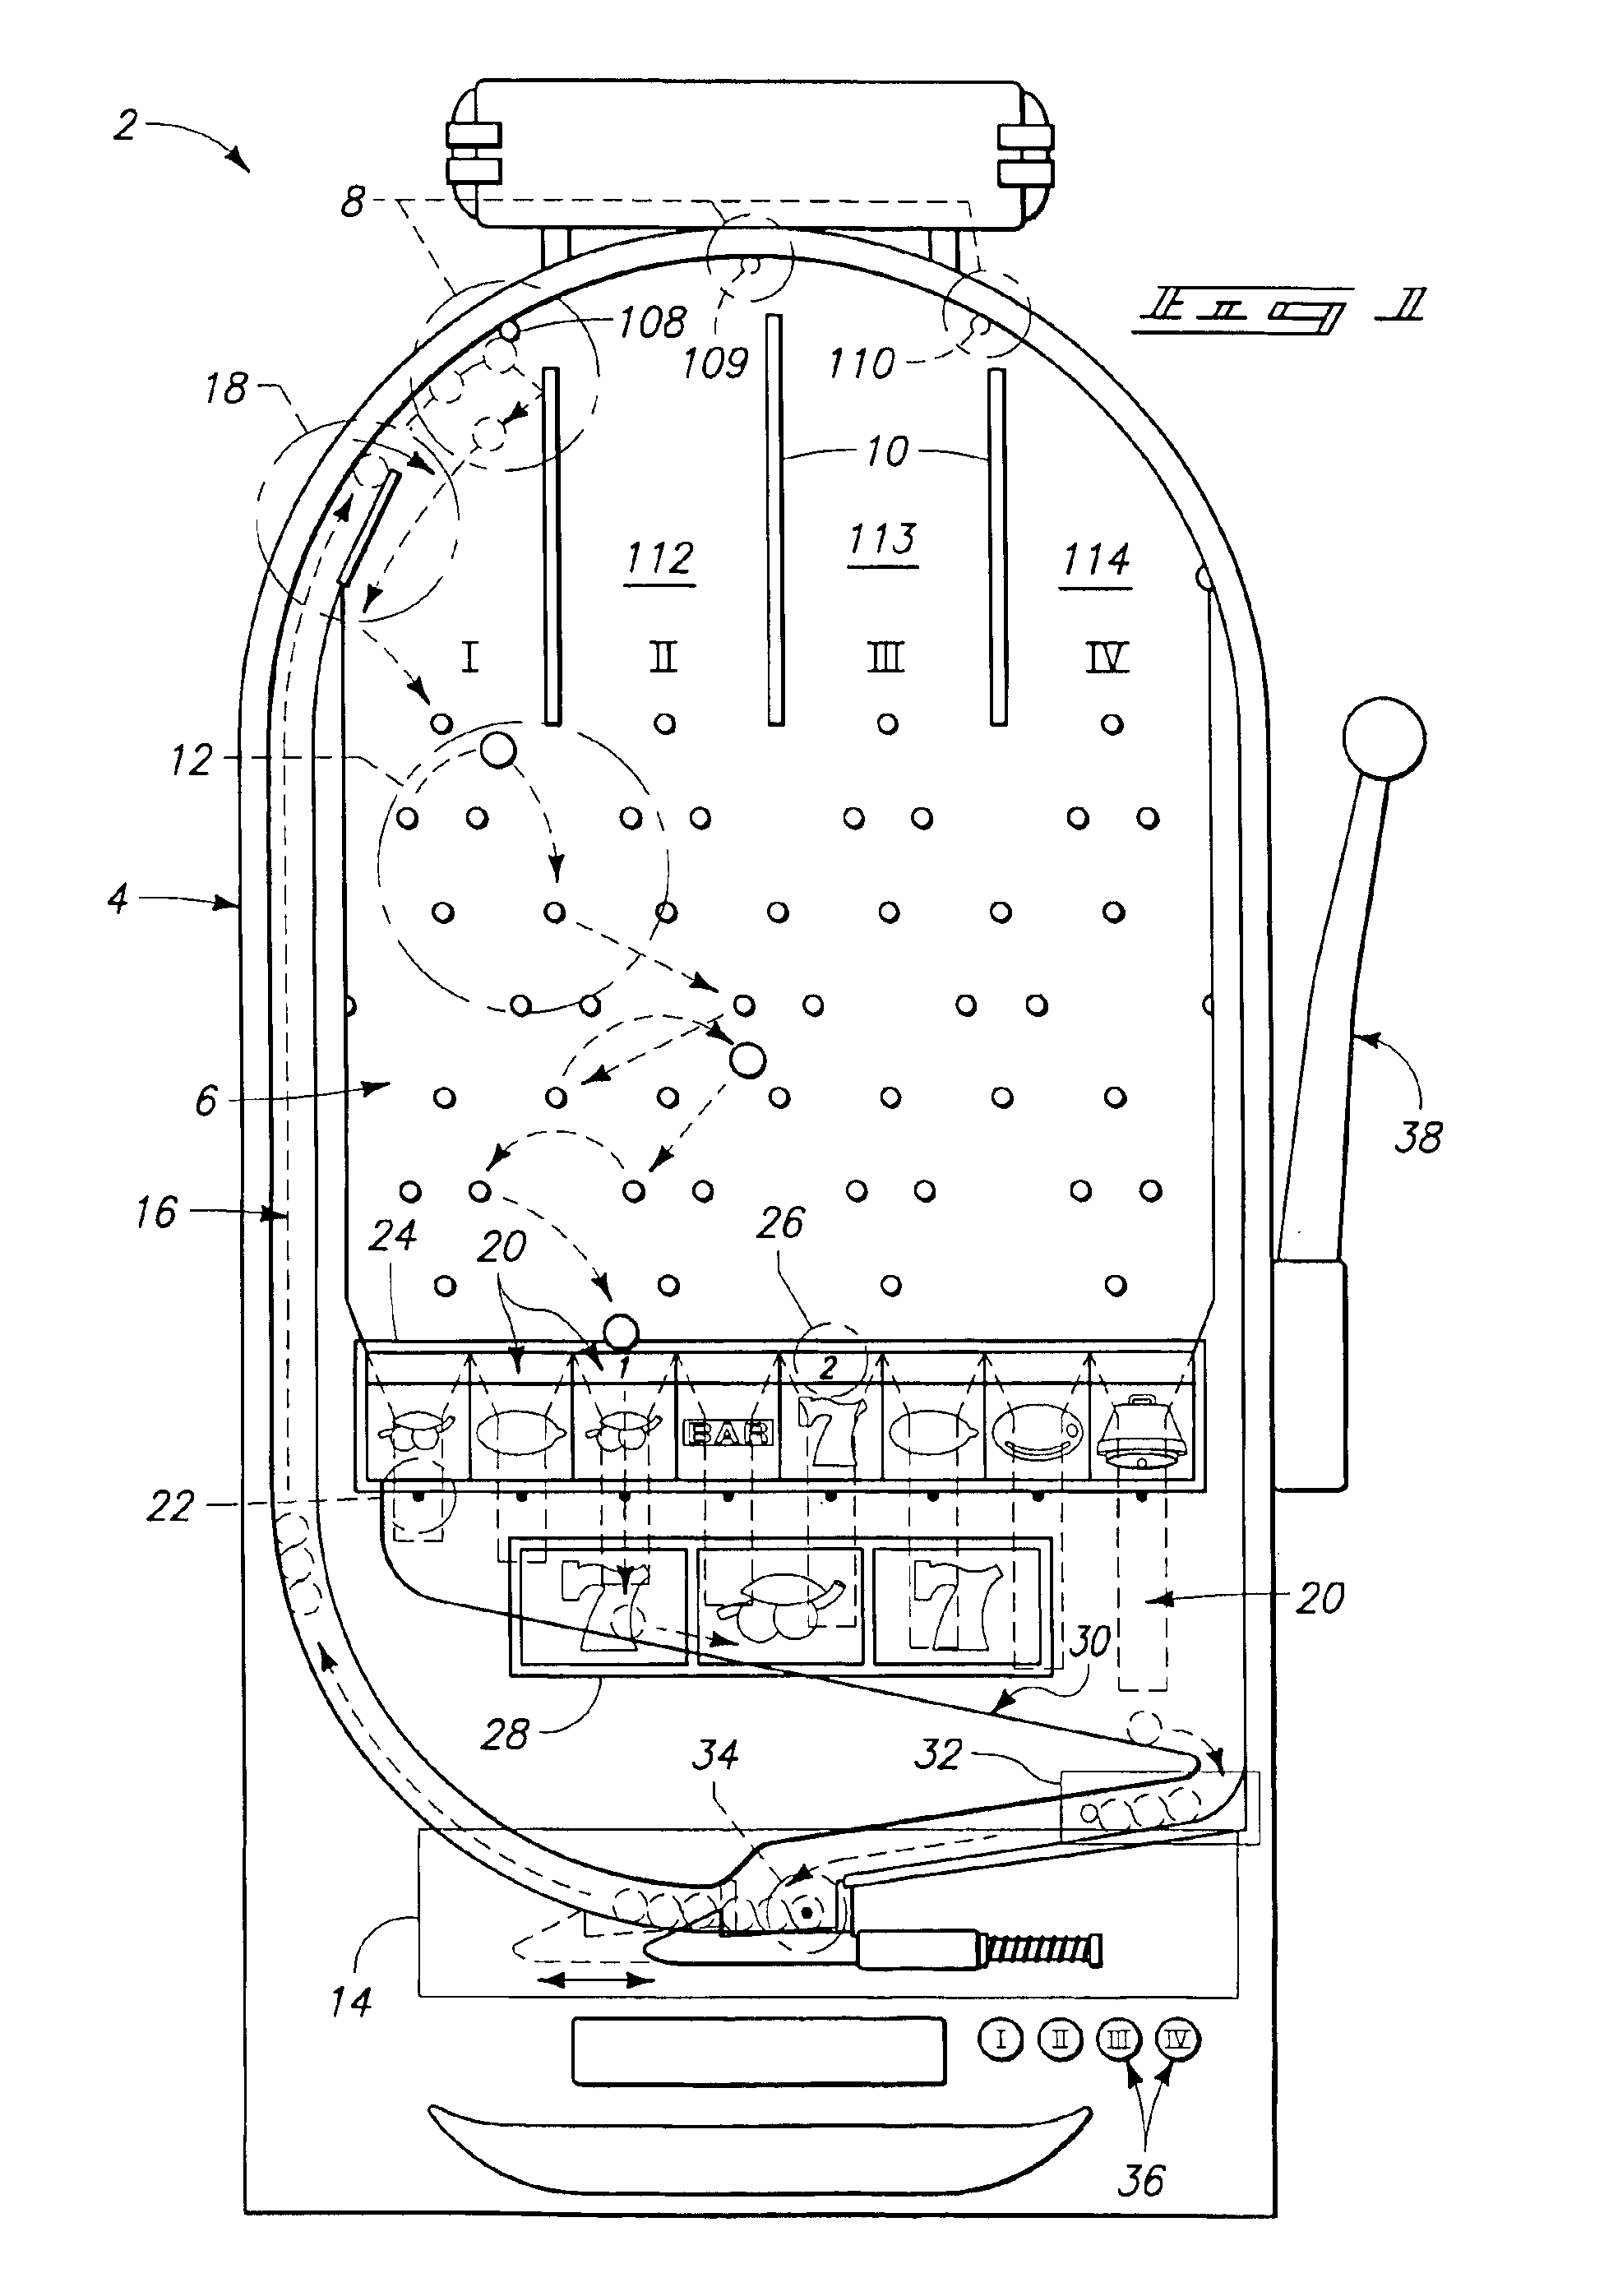 Slot-type gaming machine with variable drop zone symbols